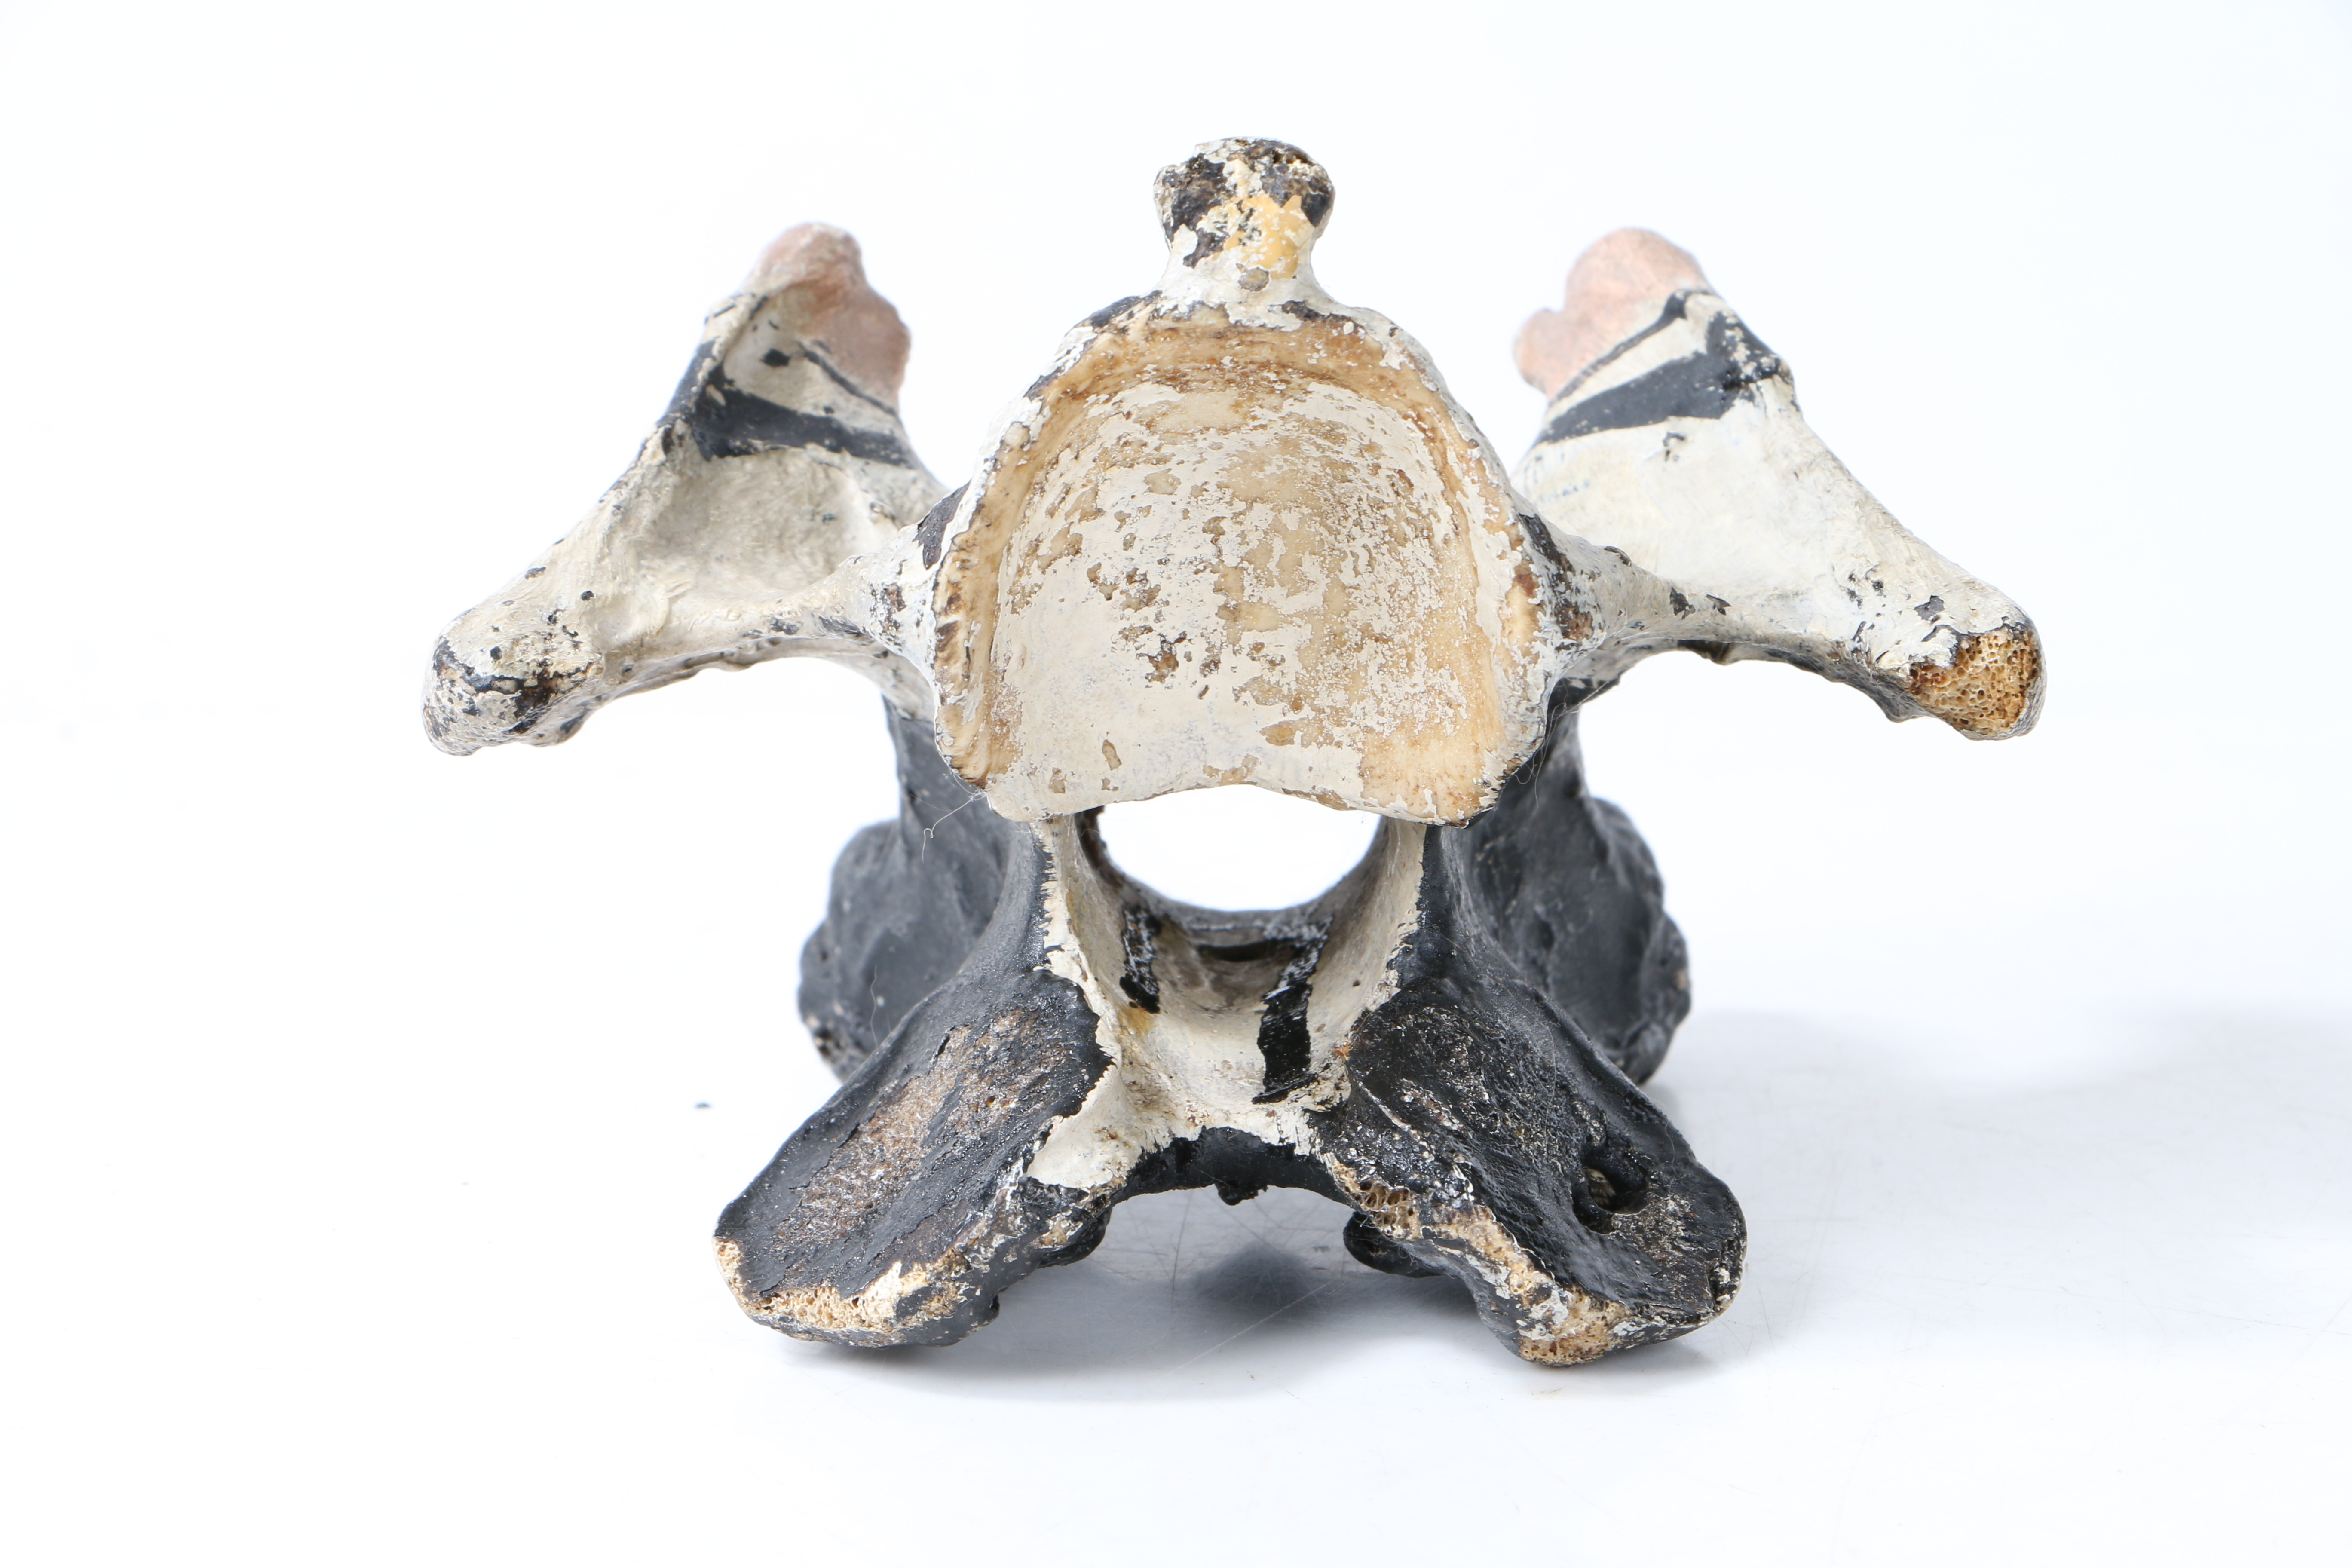 A UNUSUAL 19TH CENTURY PAINTED WHALE VERTEBRAE IN THE FORM OF JOHN WESLEY. - Image 7 of 7